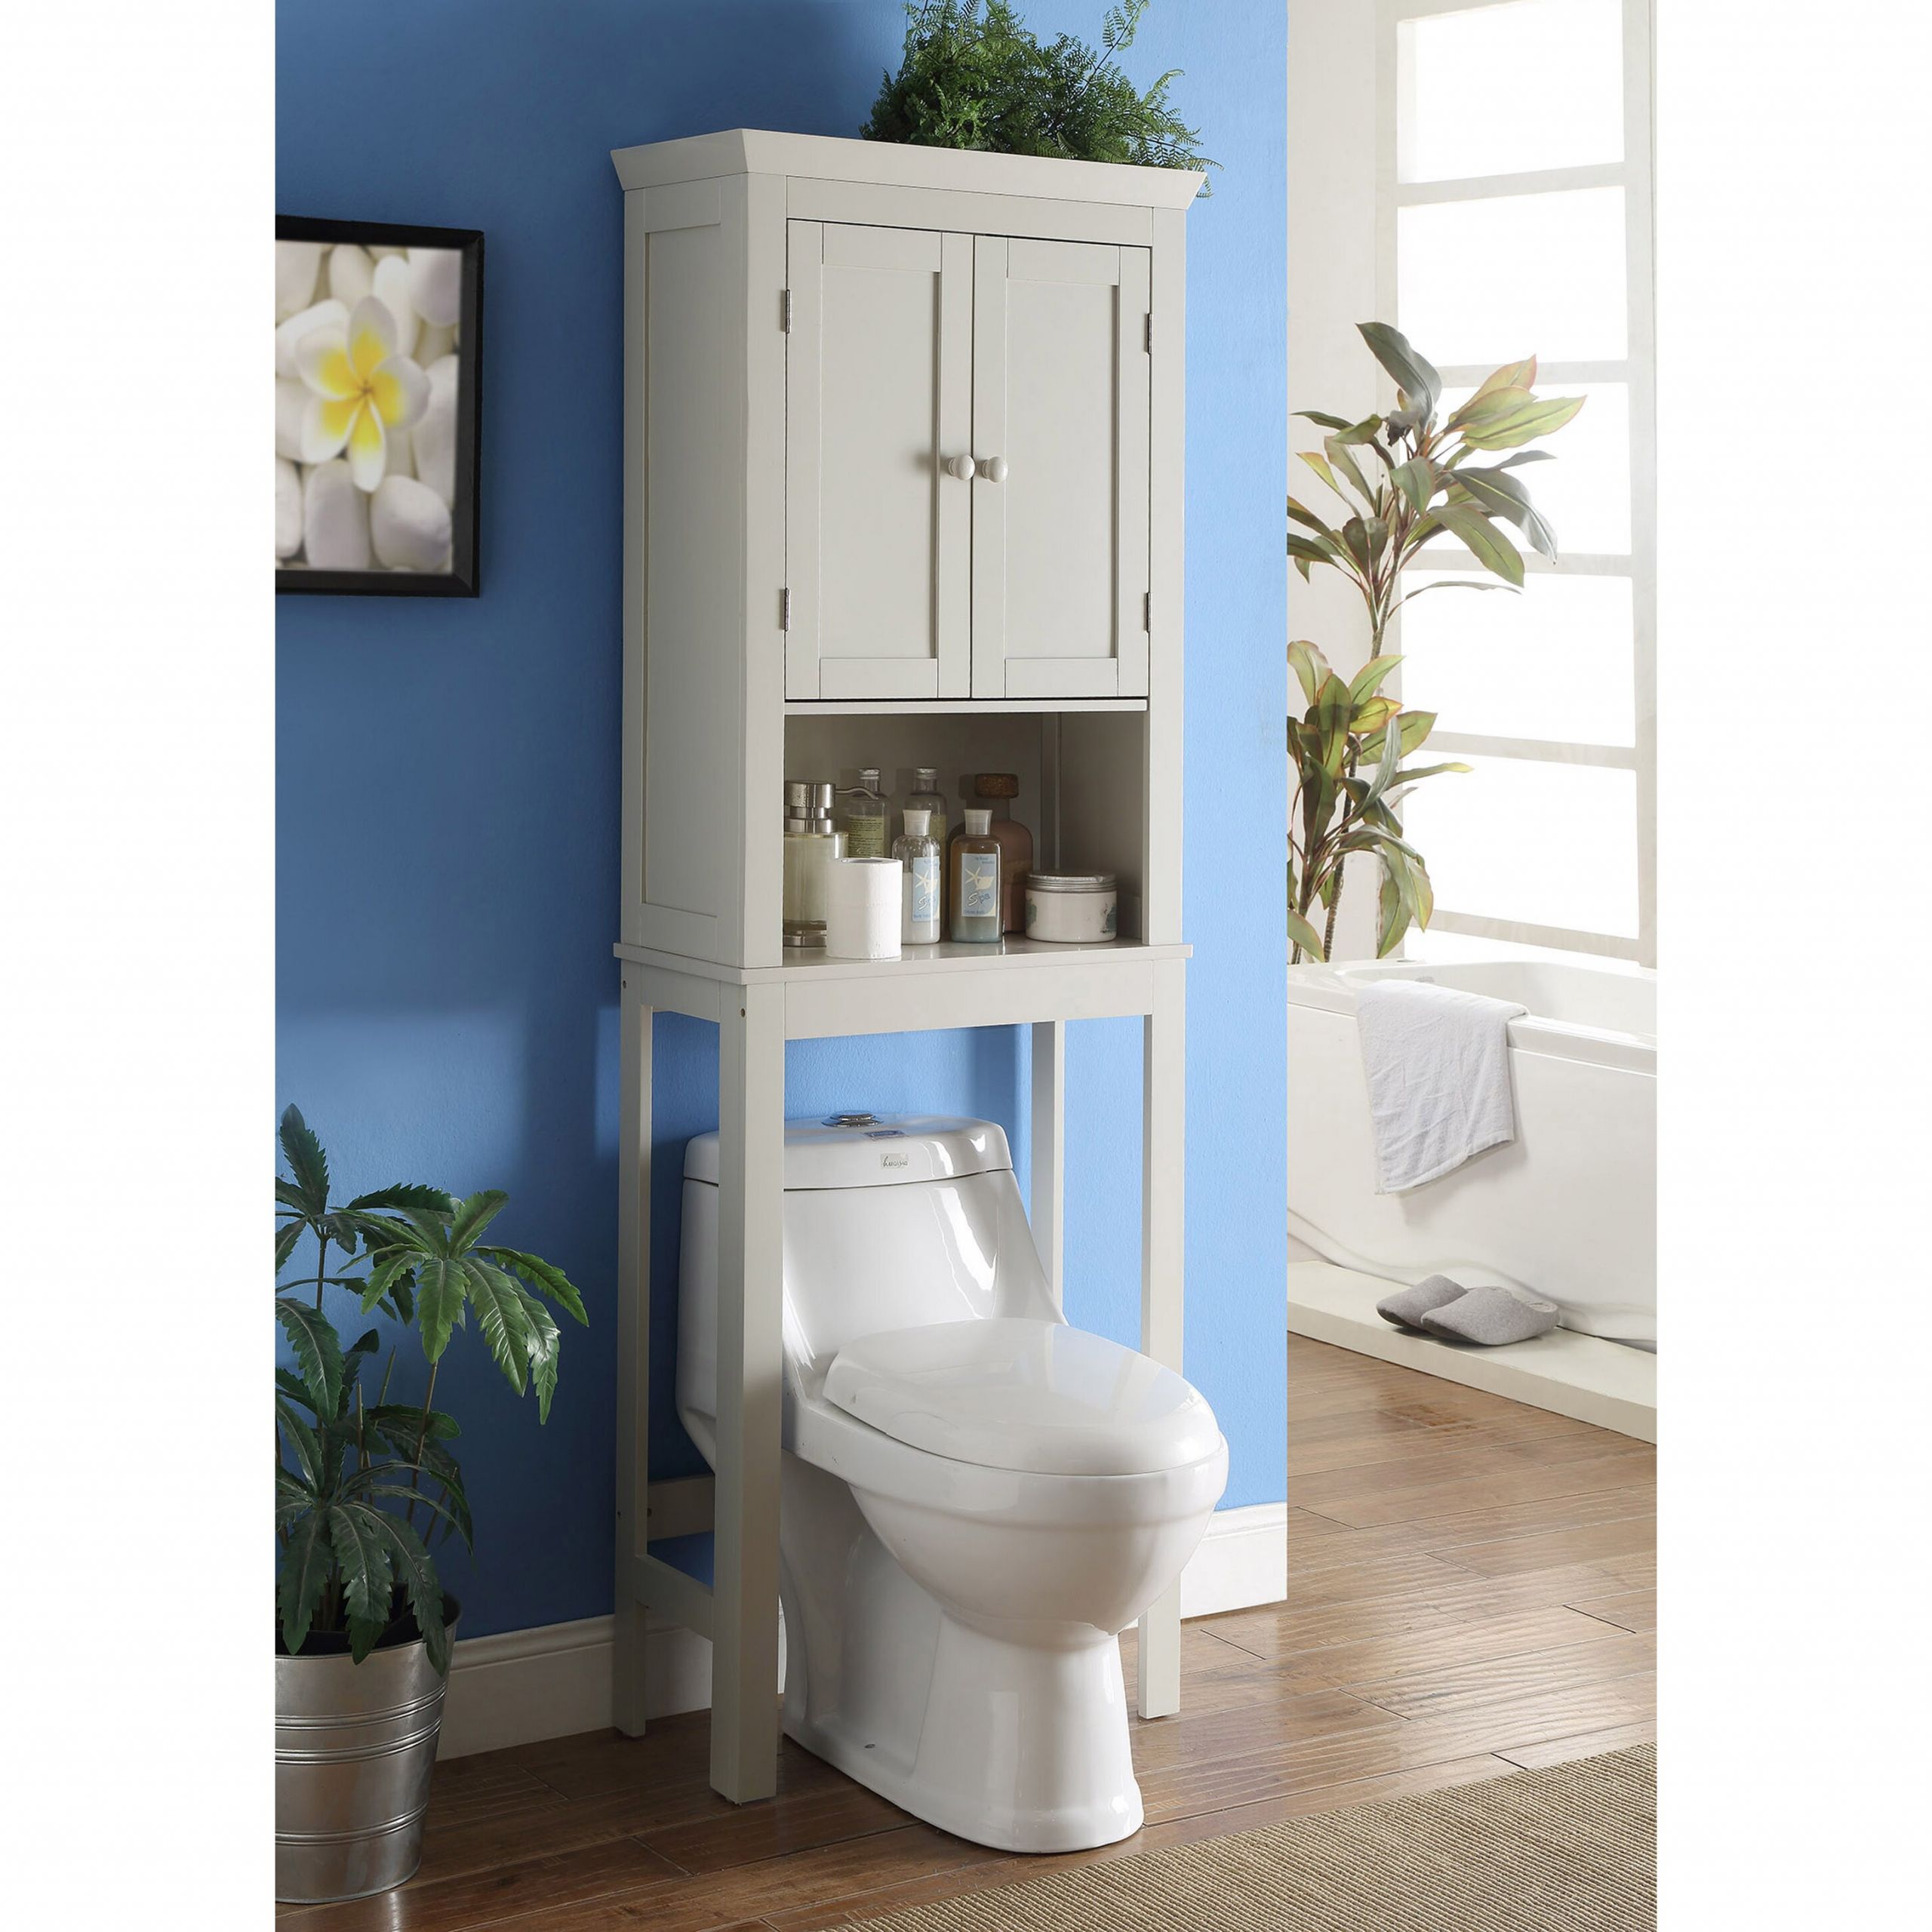 Bathroom Cabinets Over The Toilet
 4D Concepts Rancho Bathroom Space Saver Over the Toilet